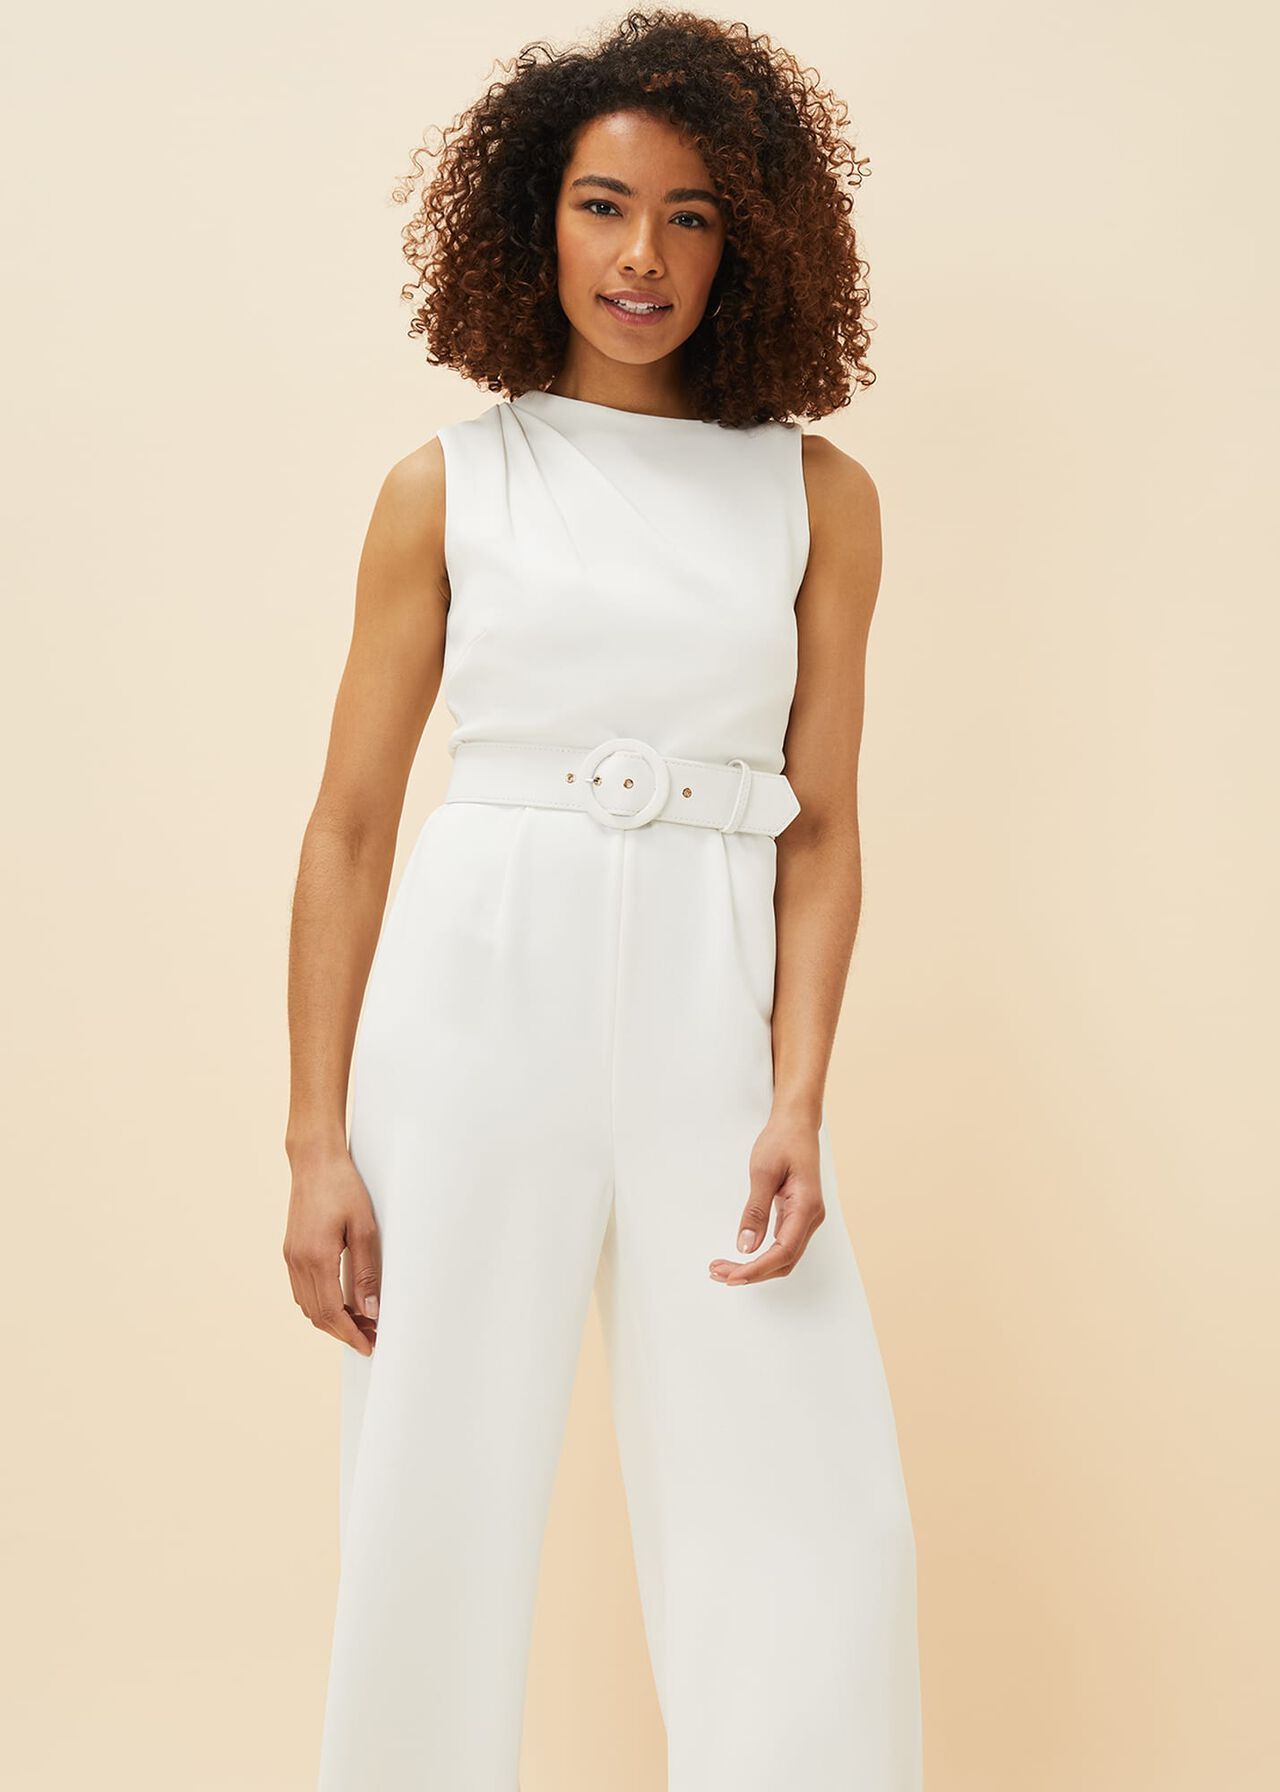 <p><strong>£169.00</strong></p><p><a href="https://www.phase-eight.com/product/gracie-wide-leg-jumpsuit-221021106.html#q=jumpsuit&is=false&sz=60&start=0&isSecondPage=false&pid=221021106&pos=8">Shop Now</a></p><p>Love the look of a white gown but not the fuss? This jumpsuit has pleated wide-leg pants that’ll swish just as elegantly as any skirt while you walk down the aisle. The statement belt and subtle boat neck are a nice touch, too.</p>